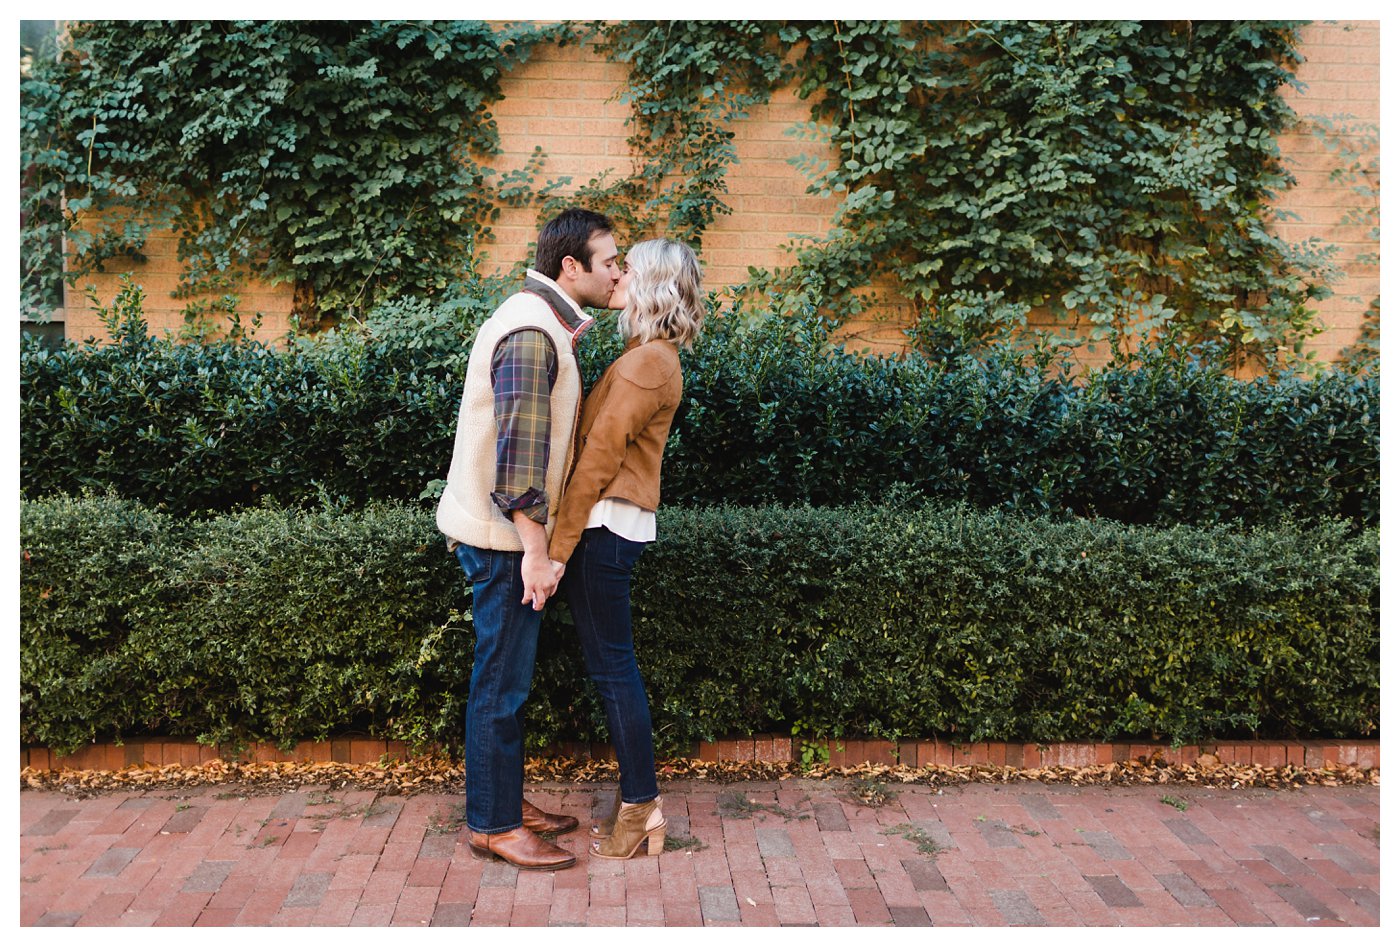 Dallas, Texas Engagement Photos by Amanda and Grady Photography